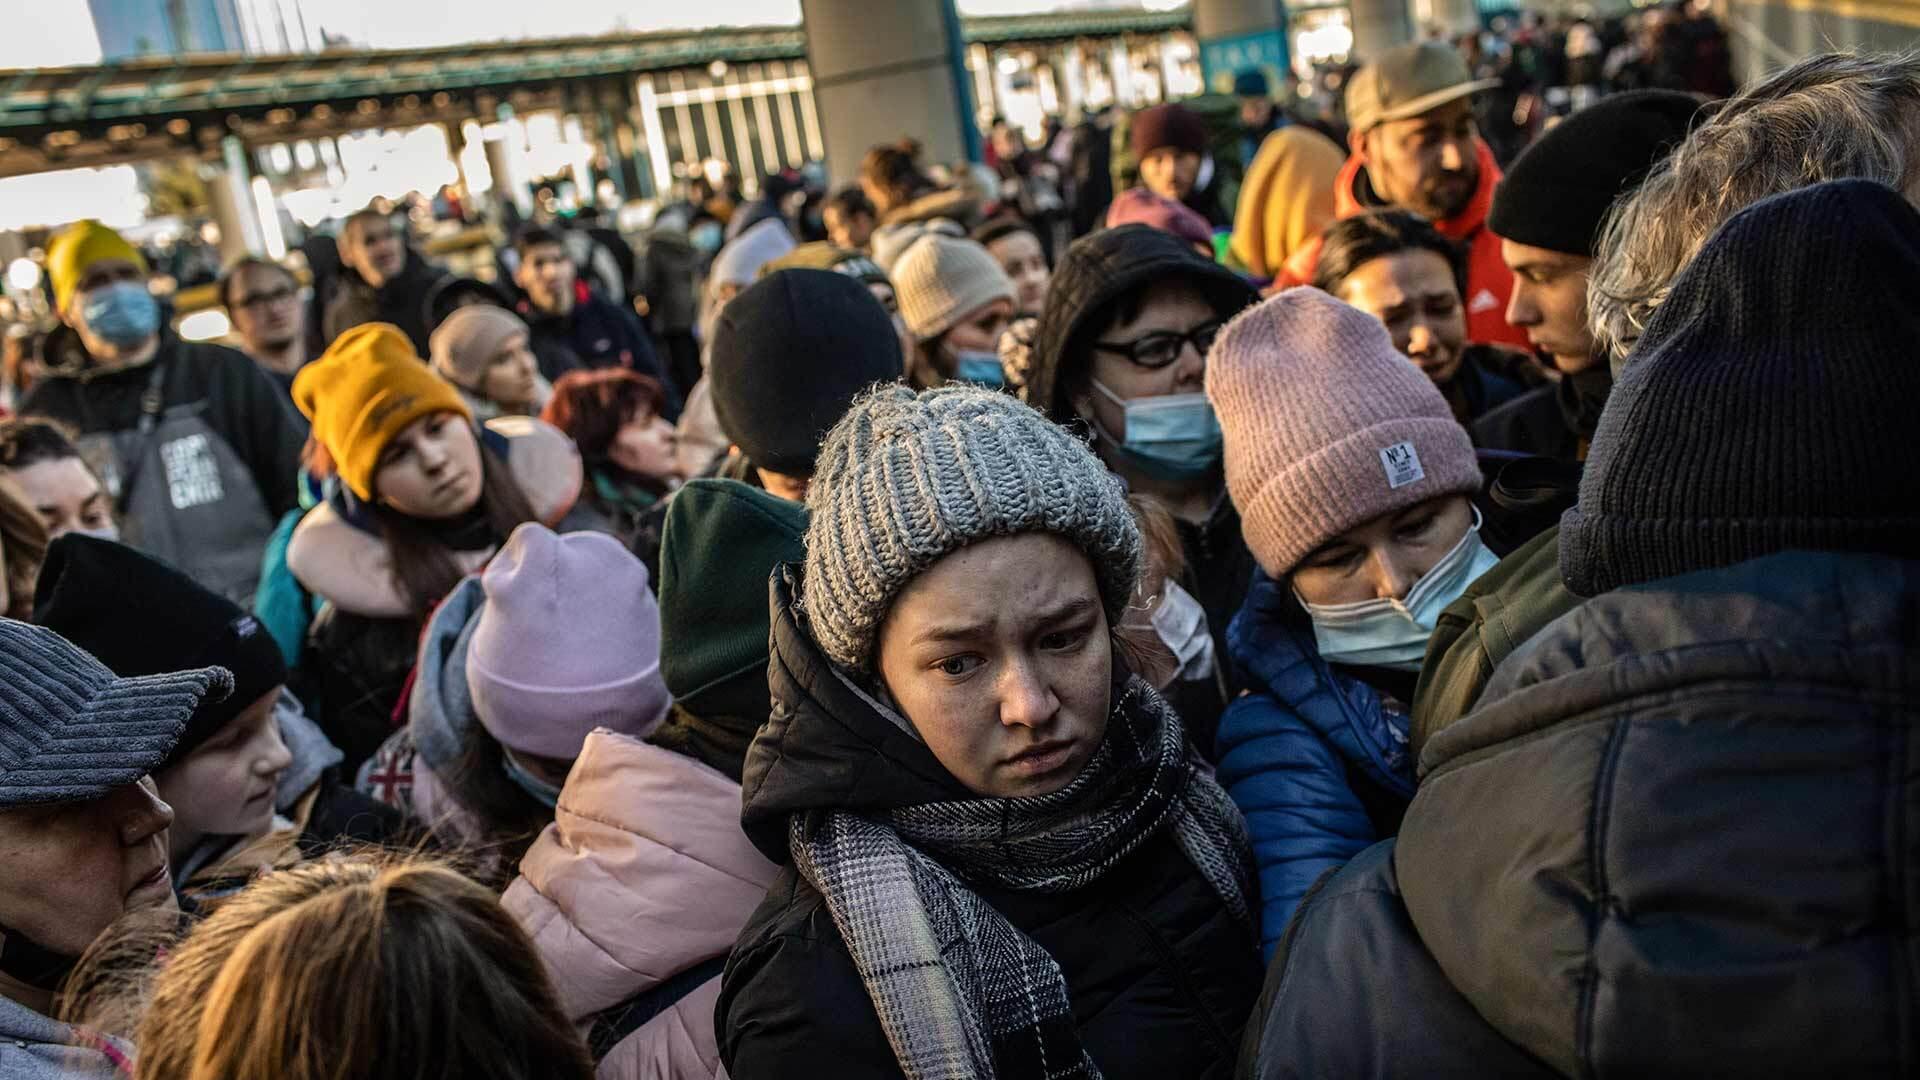 Displaced Ukrainians on Monday pack the central train station in the capital, Kyiv, which has been under attack by Russian forces for days. UMD experts said Russian President Vladimir Putin's distorted view of the region's history is one of the motives for the invasion of Ukraine.